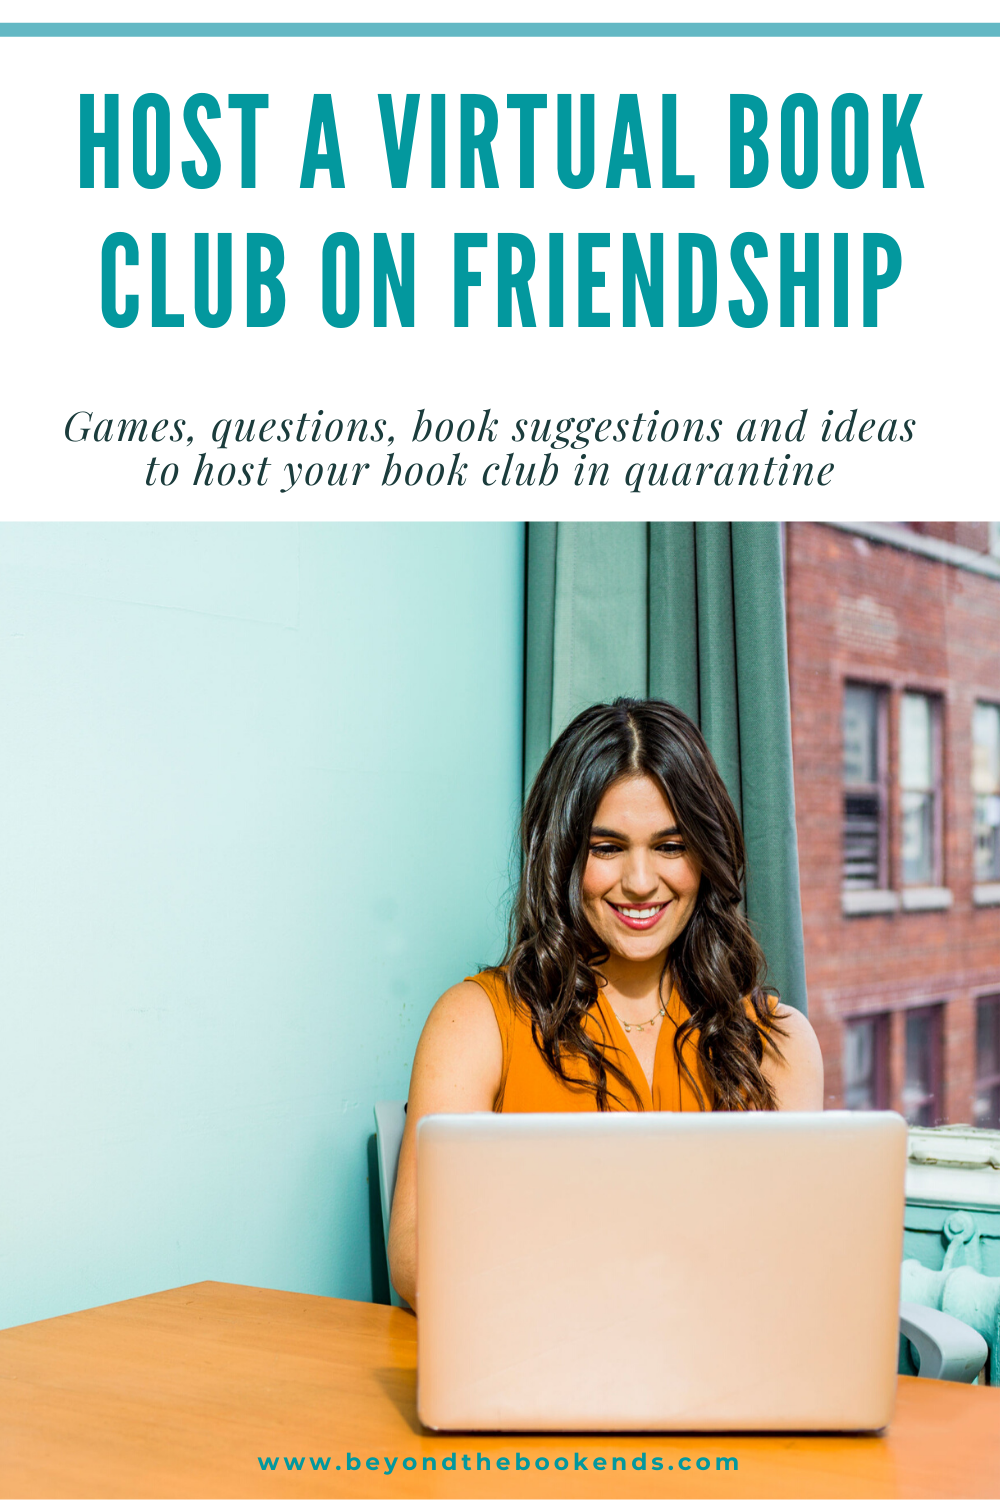 Not sure how to host your book club while in quarantine? We've got fabulous activities, book suggestions, and discussion questions to make your virtual book club a success.